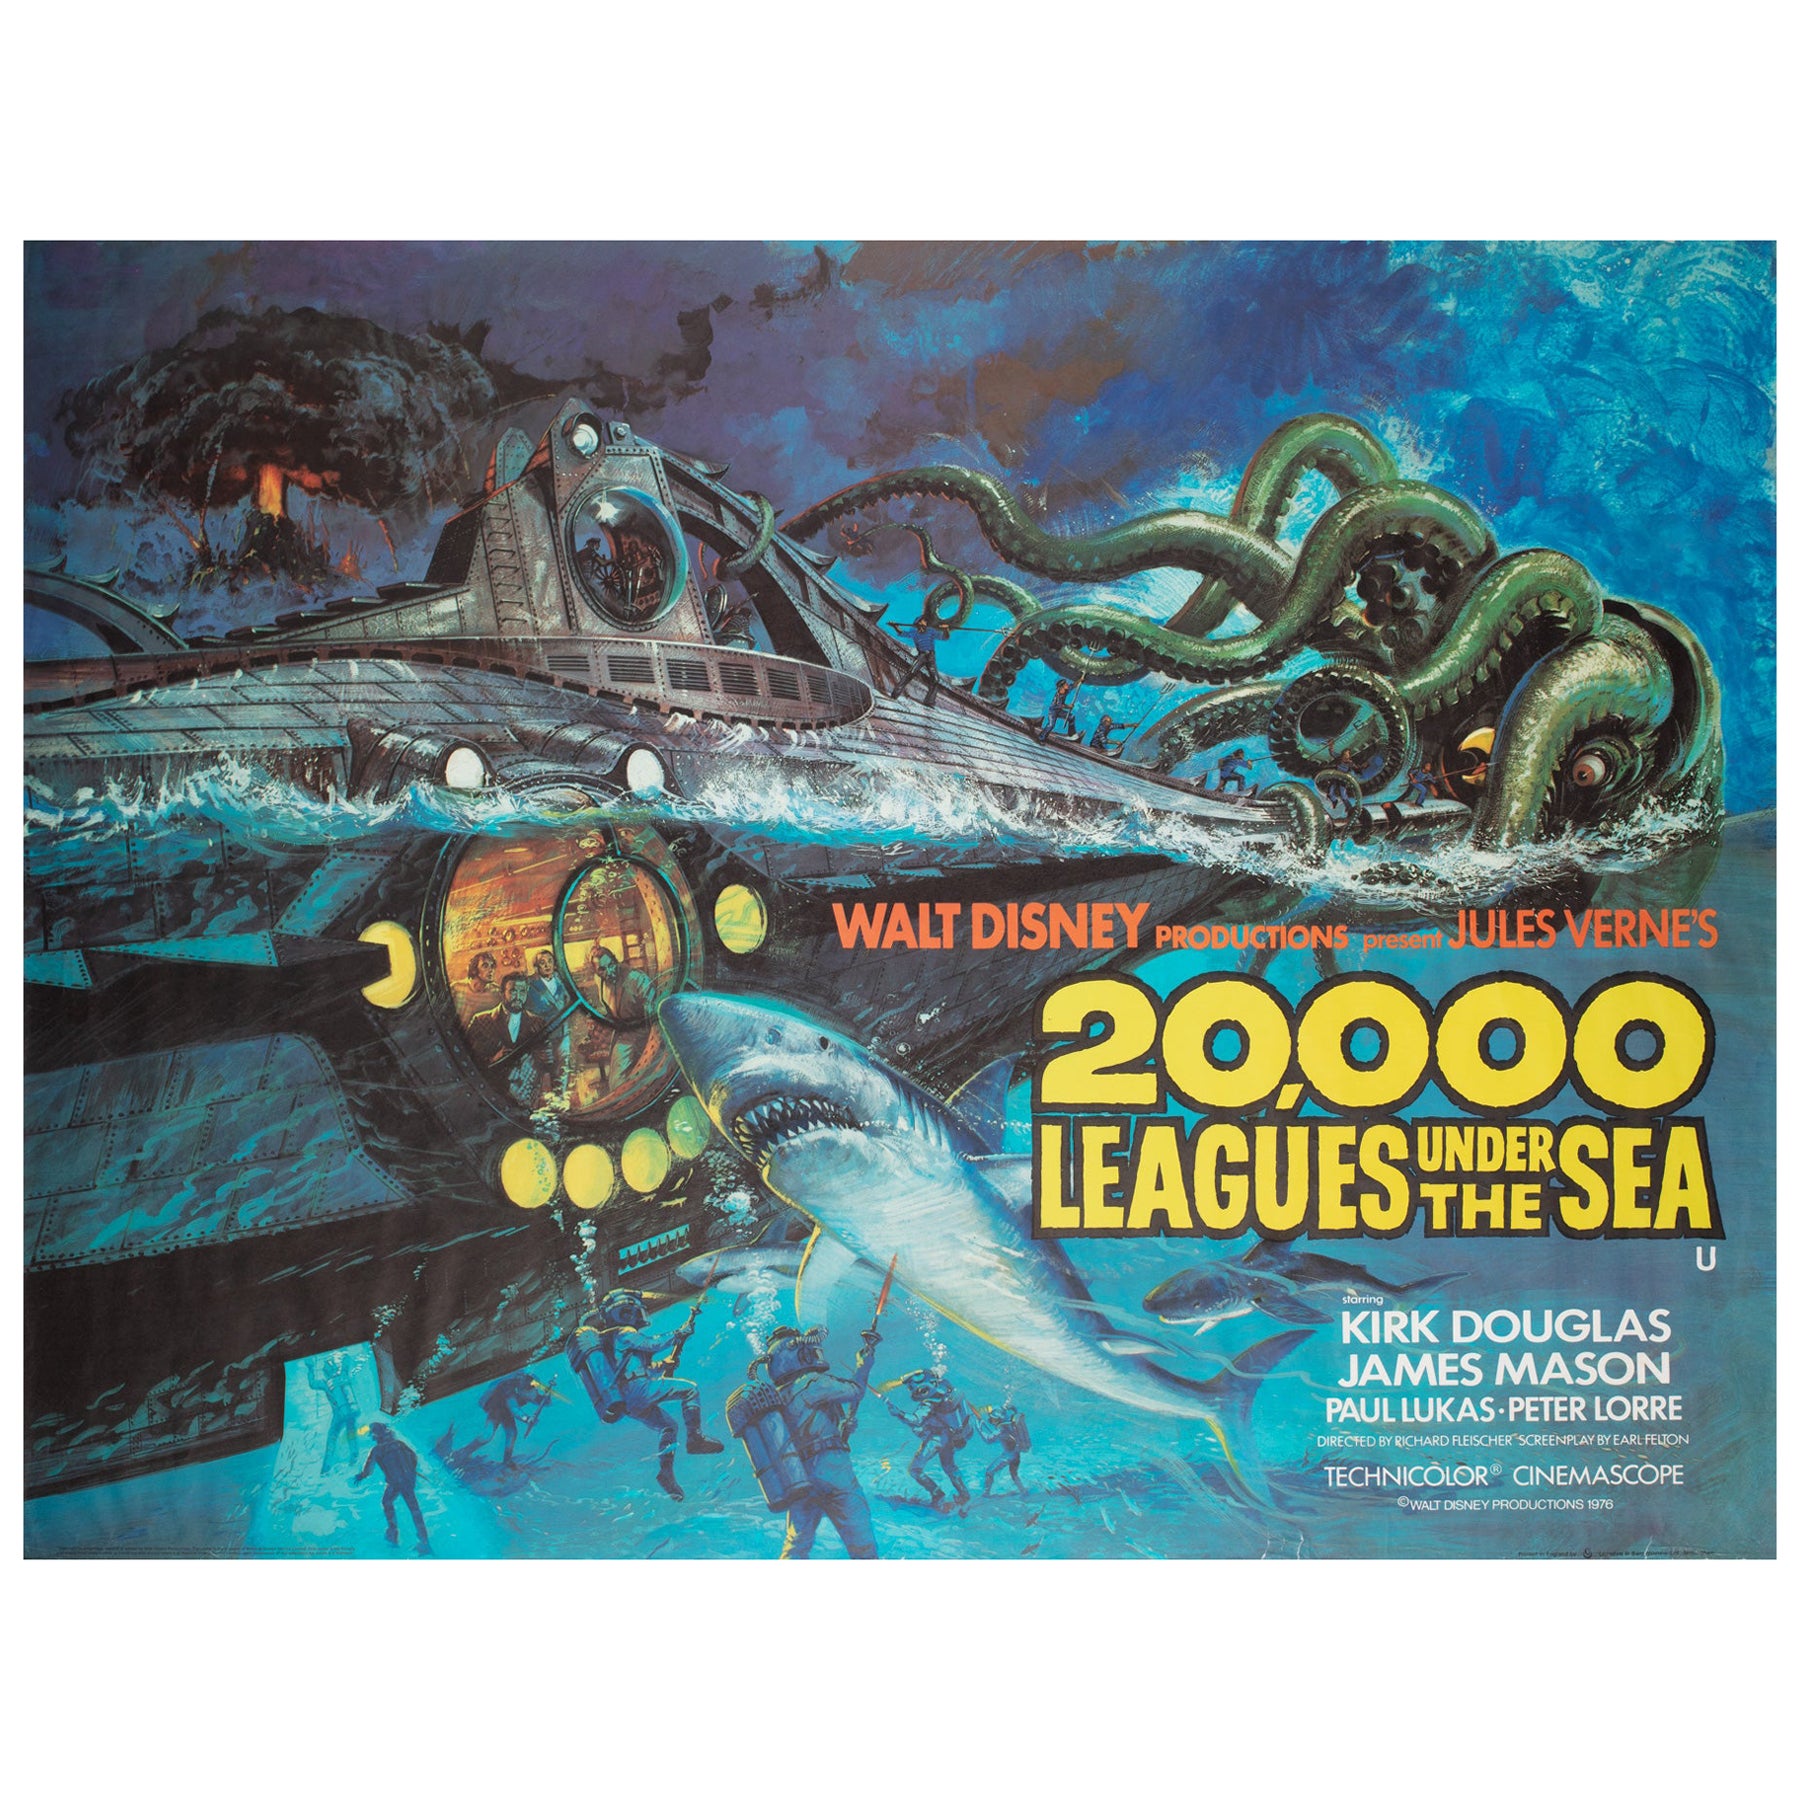 20000 Leagues Under the Sea R1976 UK Quad Film Poster, Brian Bysouth